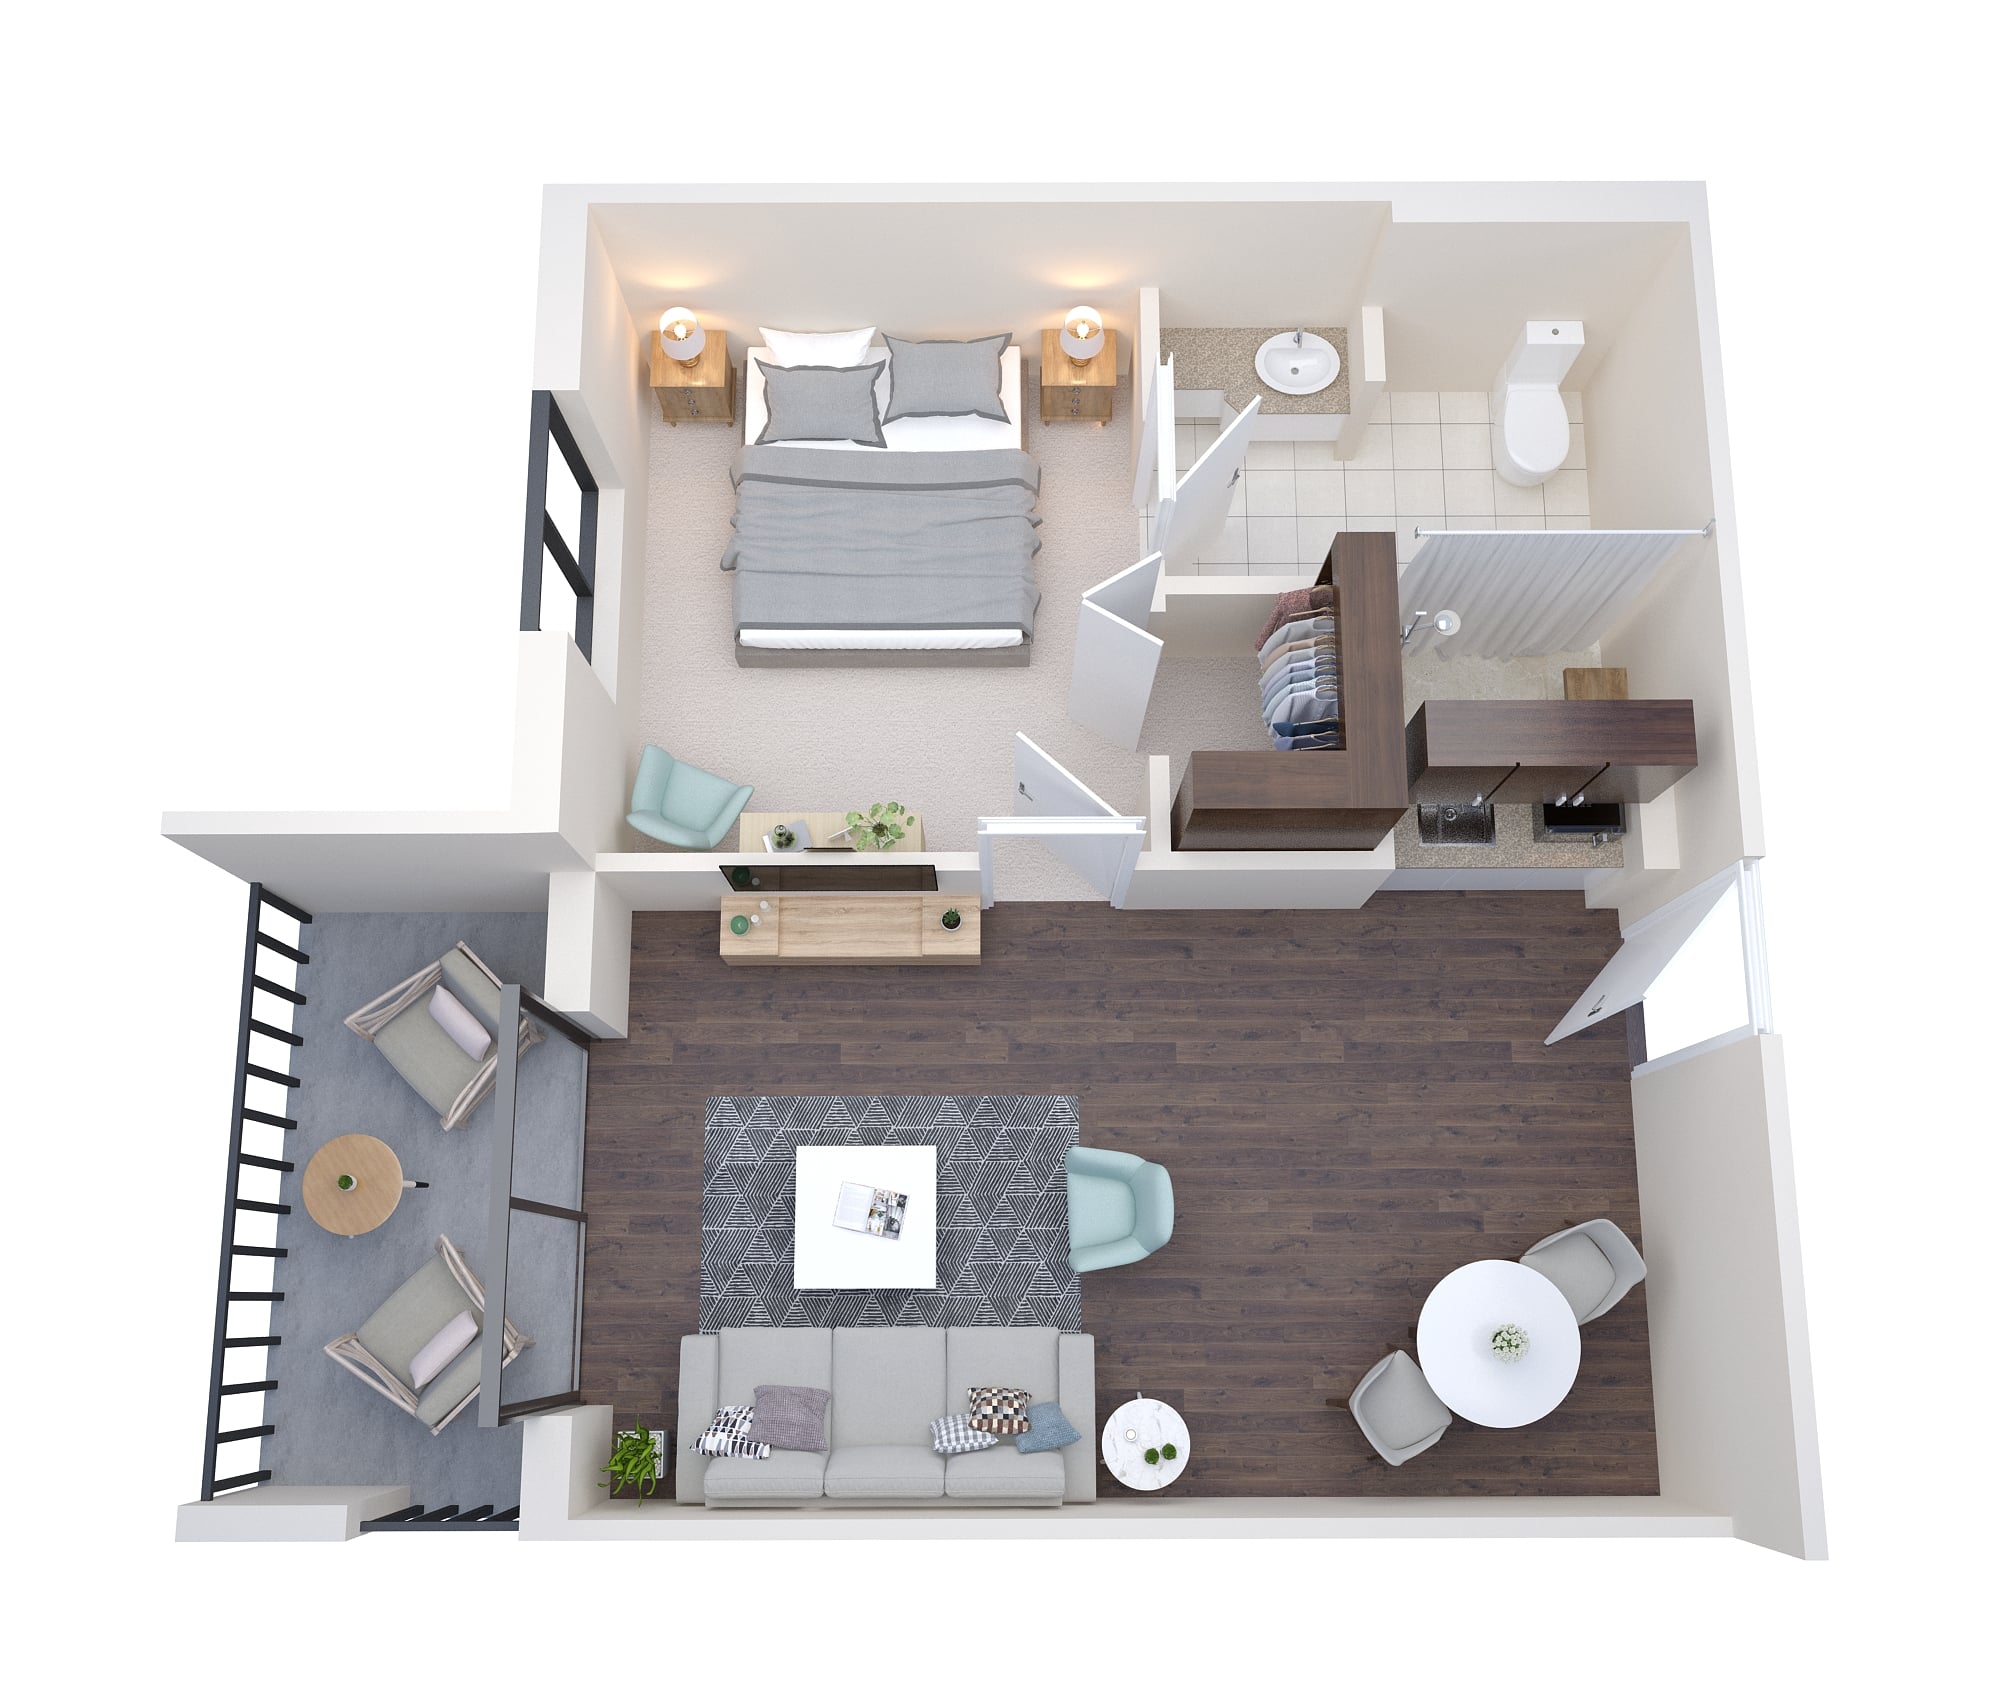 3d-floor-plan-small-house-rendering-indianapolis-indiana